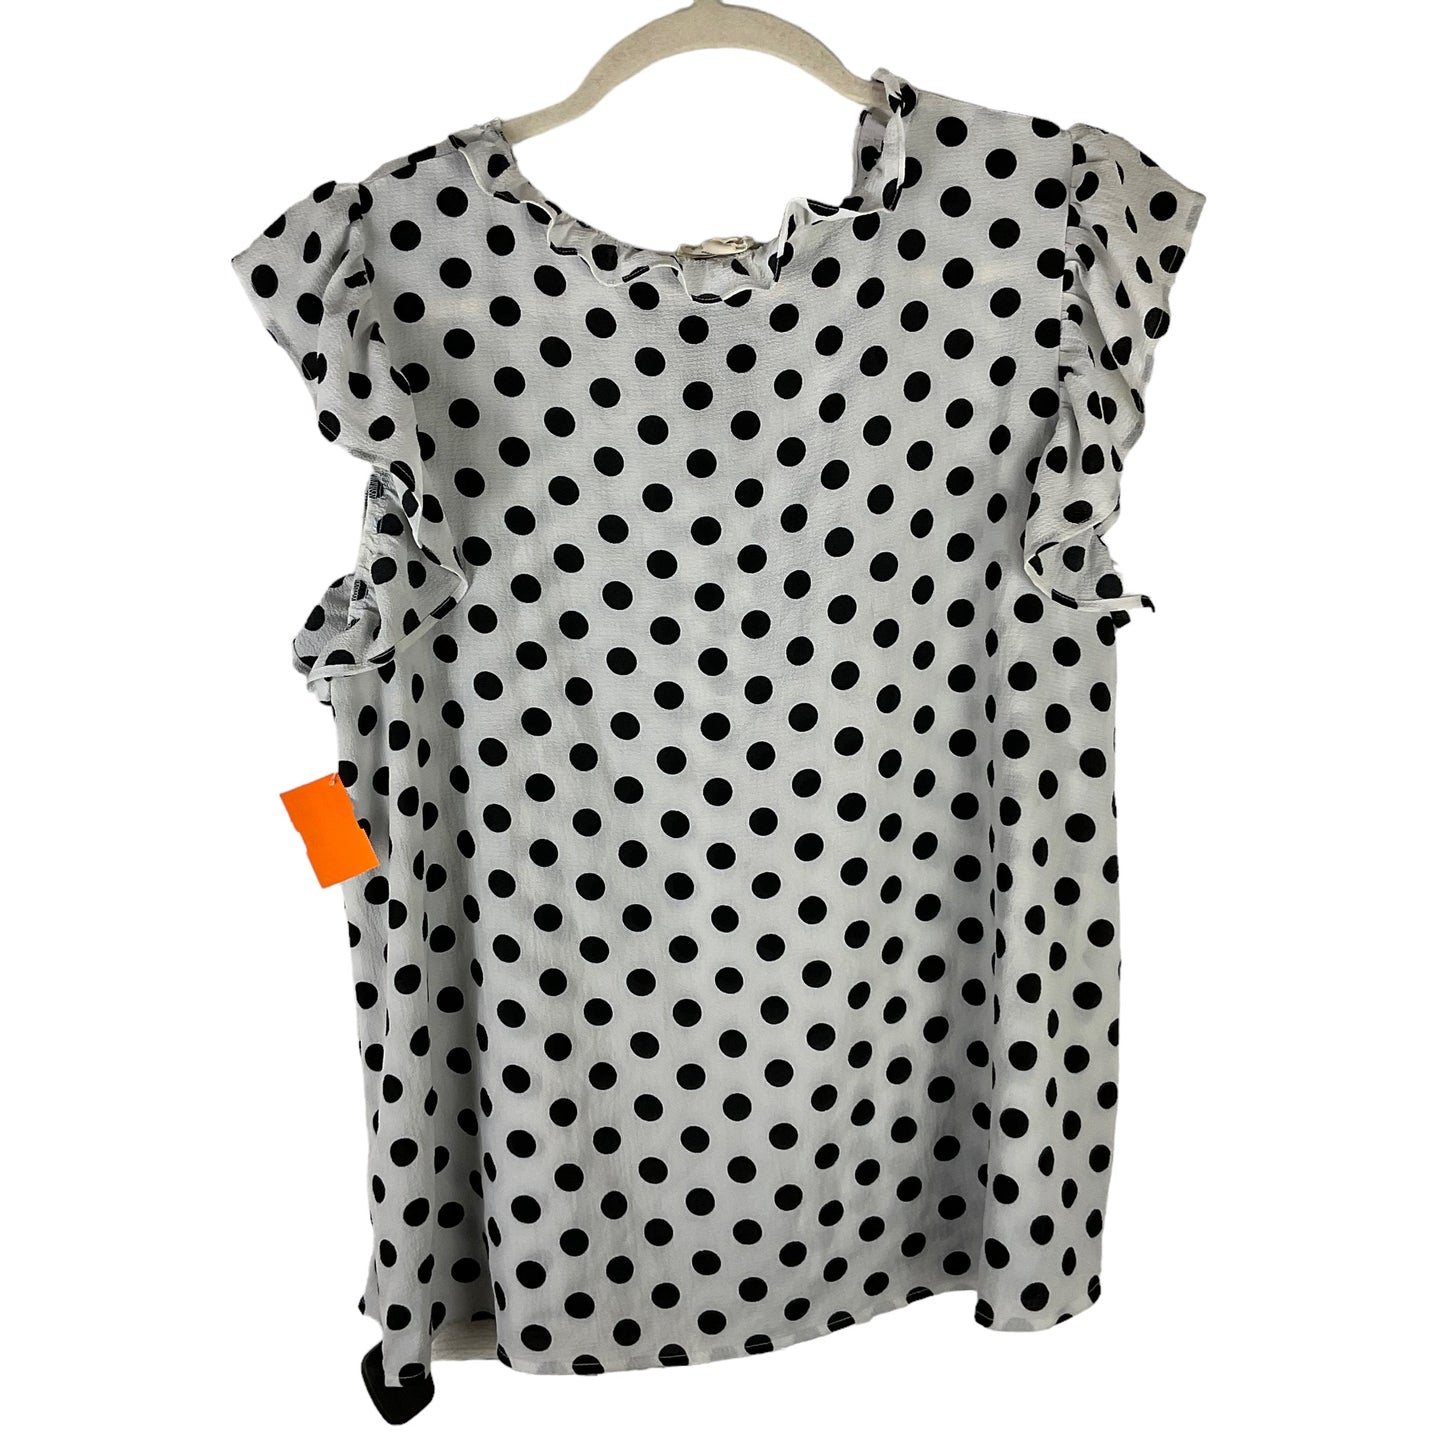 Top Short Sleeve By Clothes Mentor  Size: 3x